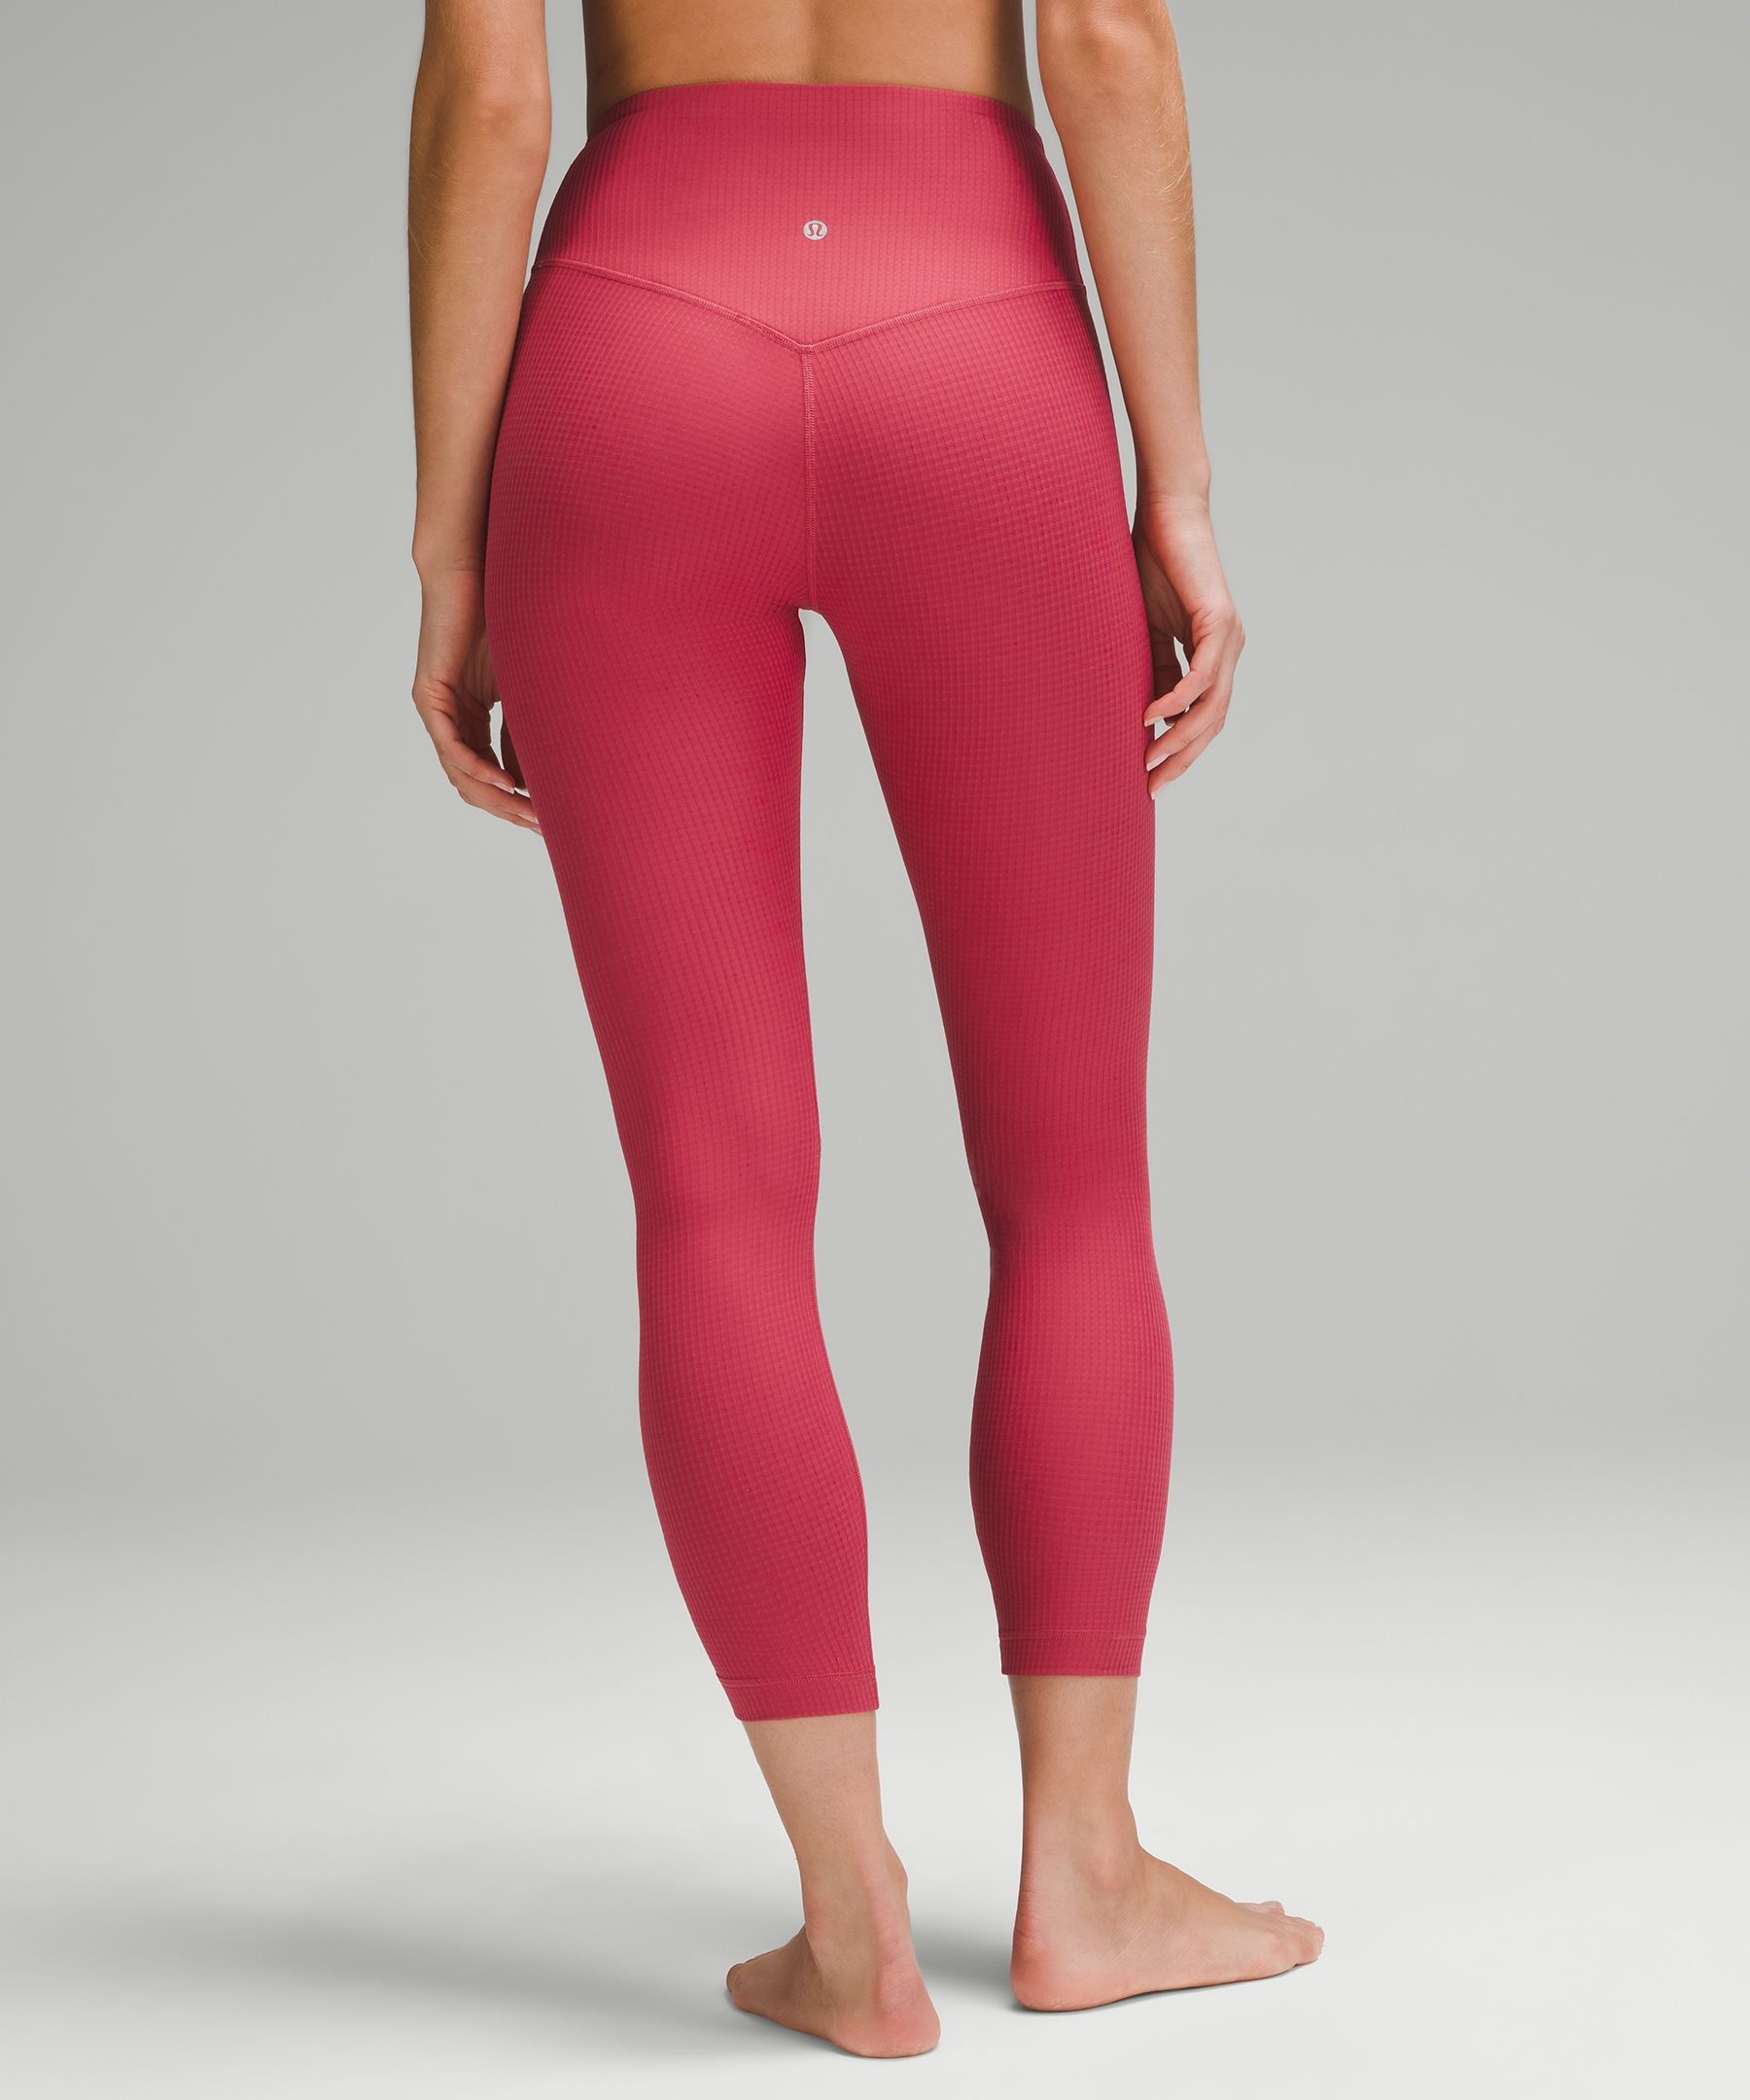 Lululemon Reveal Tight Interconnect *25.5 Ruby Red Perforated Yoga Pant 8  RARE